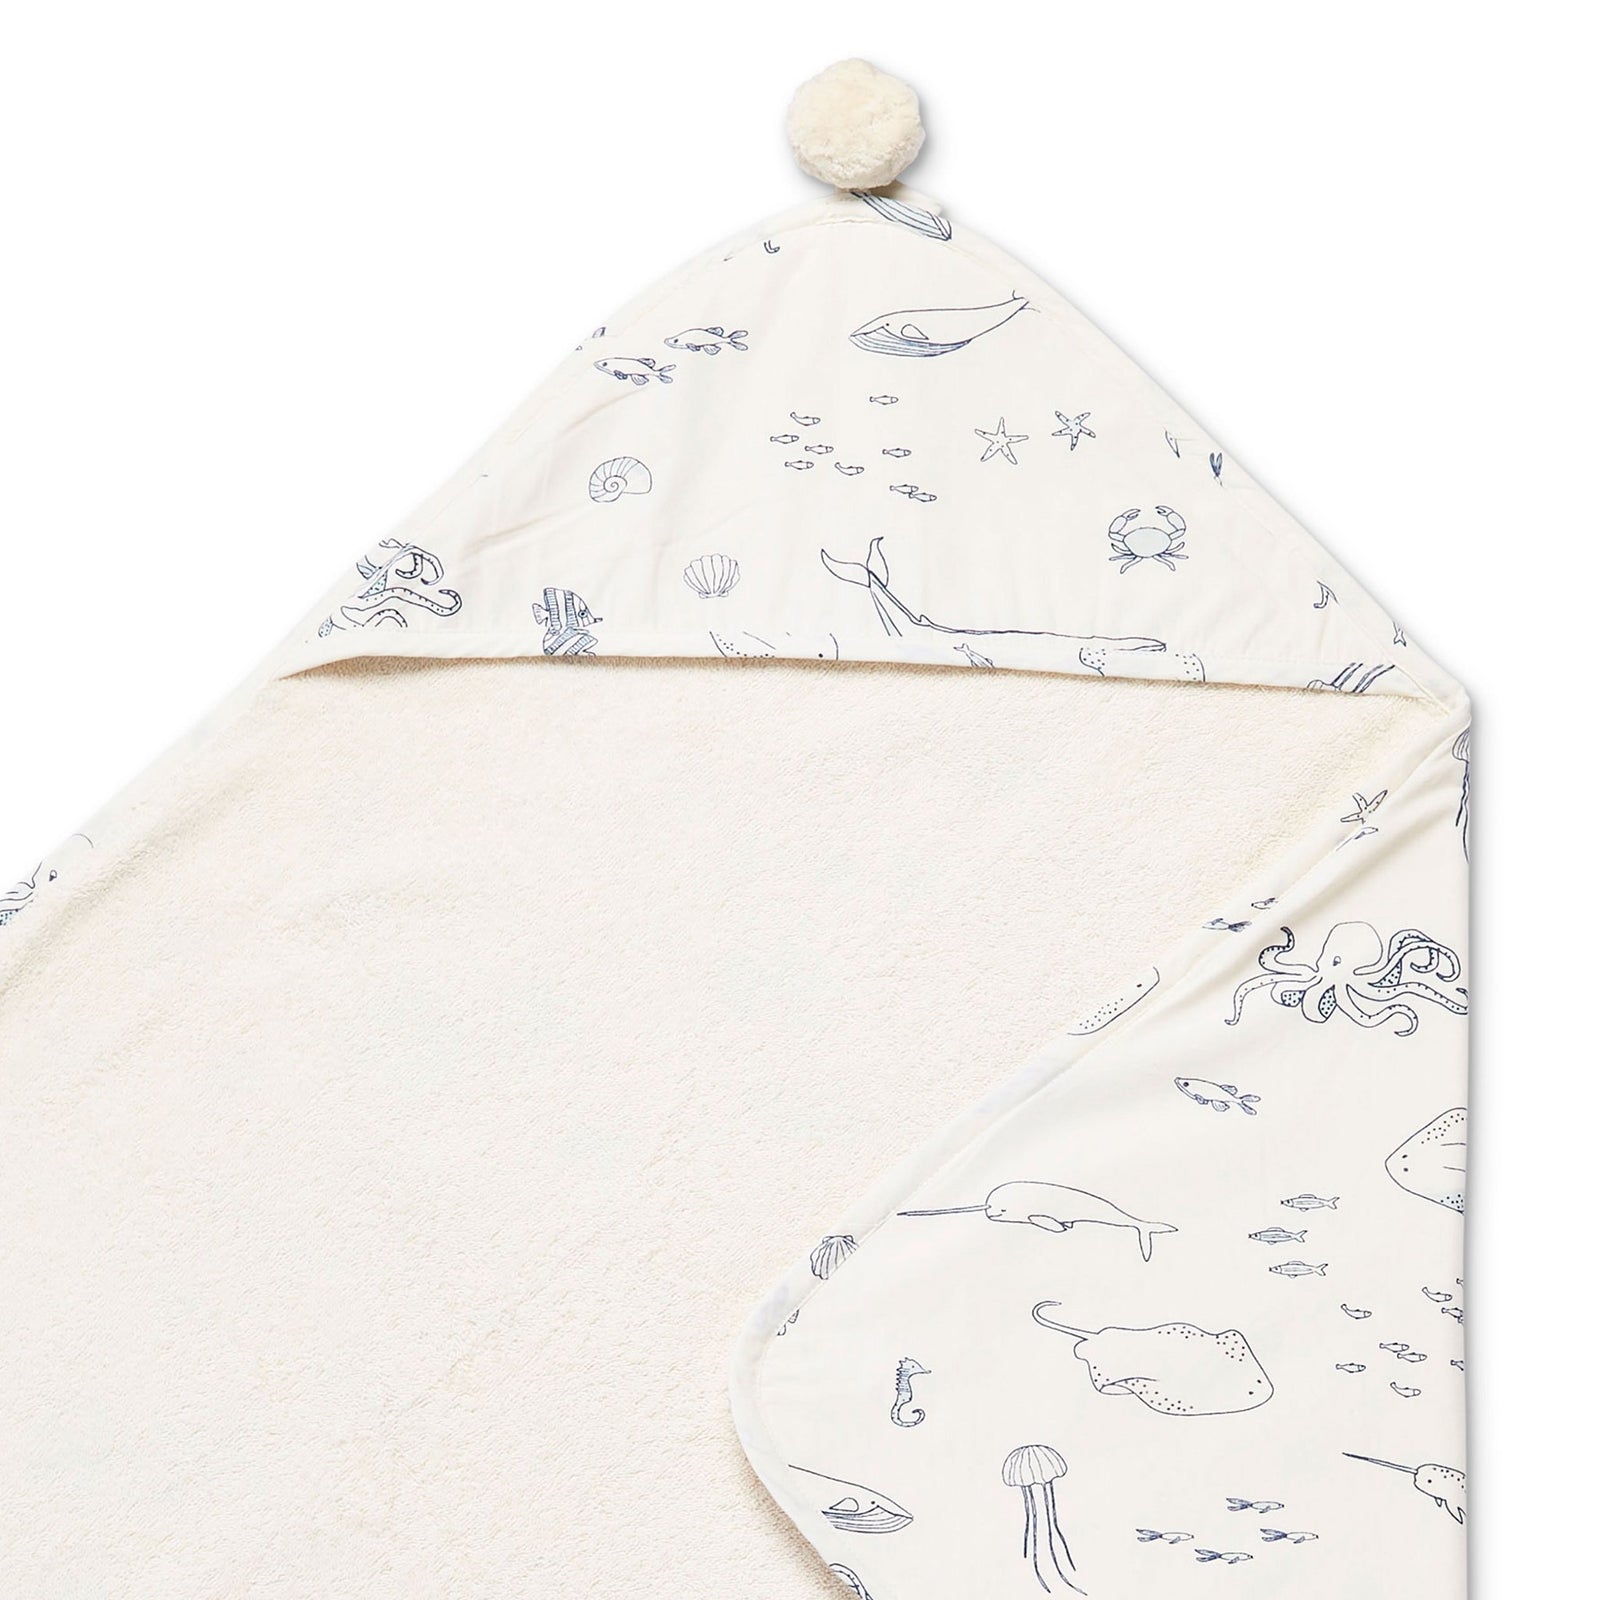 Pehr Life Aquatic Hood Towel. Hand printed. Cotton. White with blue sea creatures, terry cloth inside.